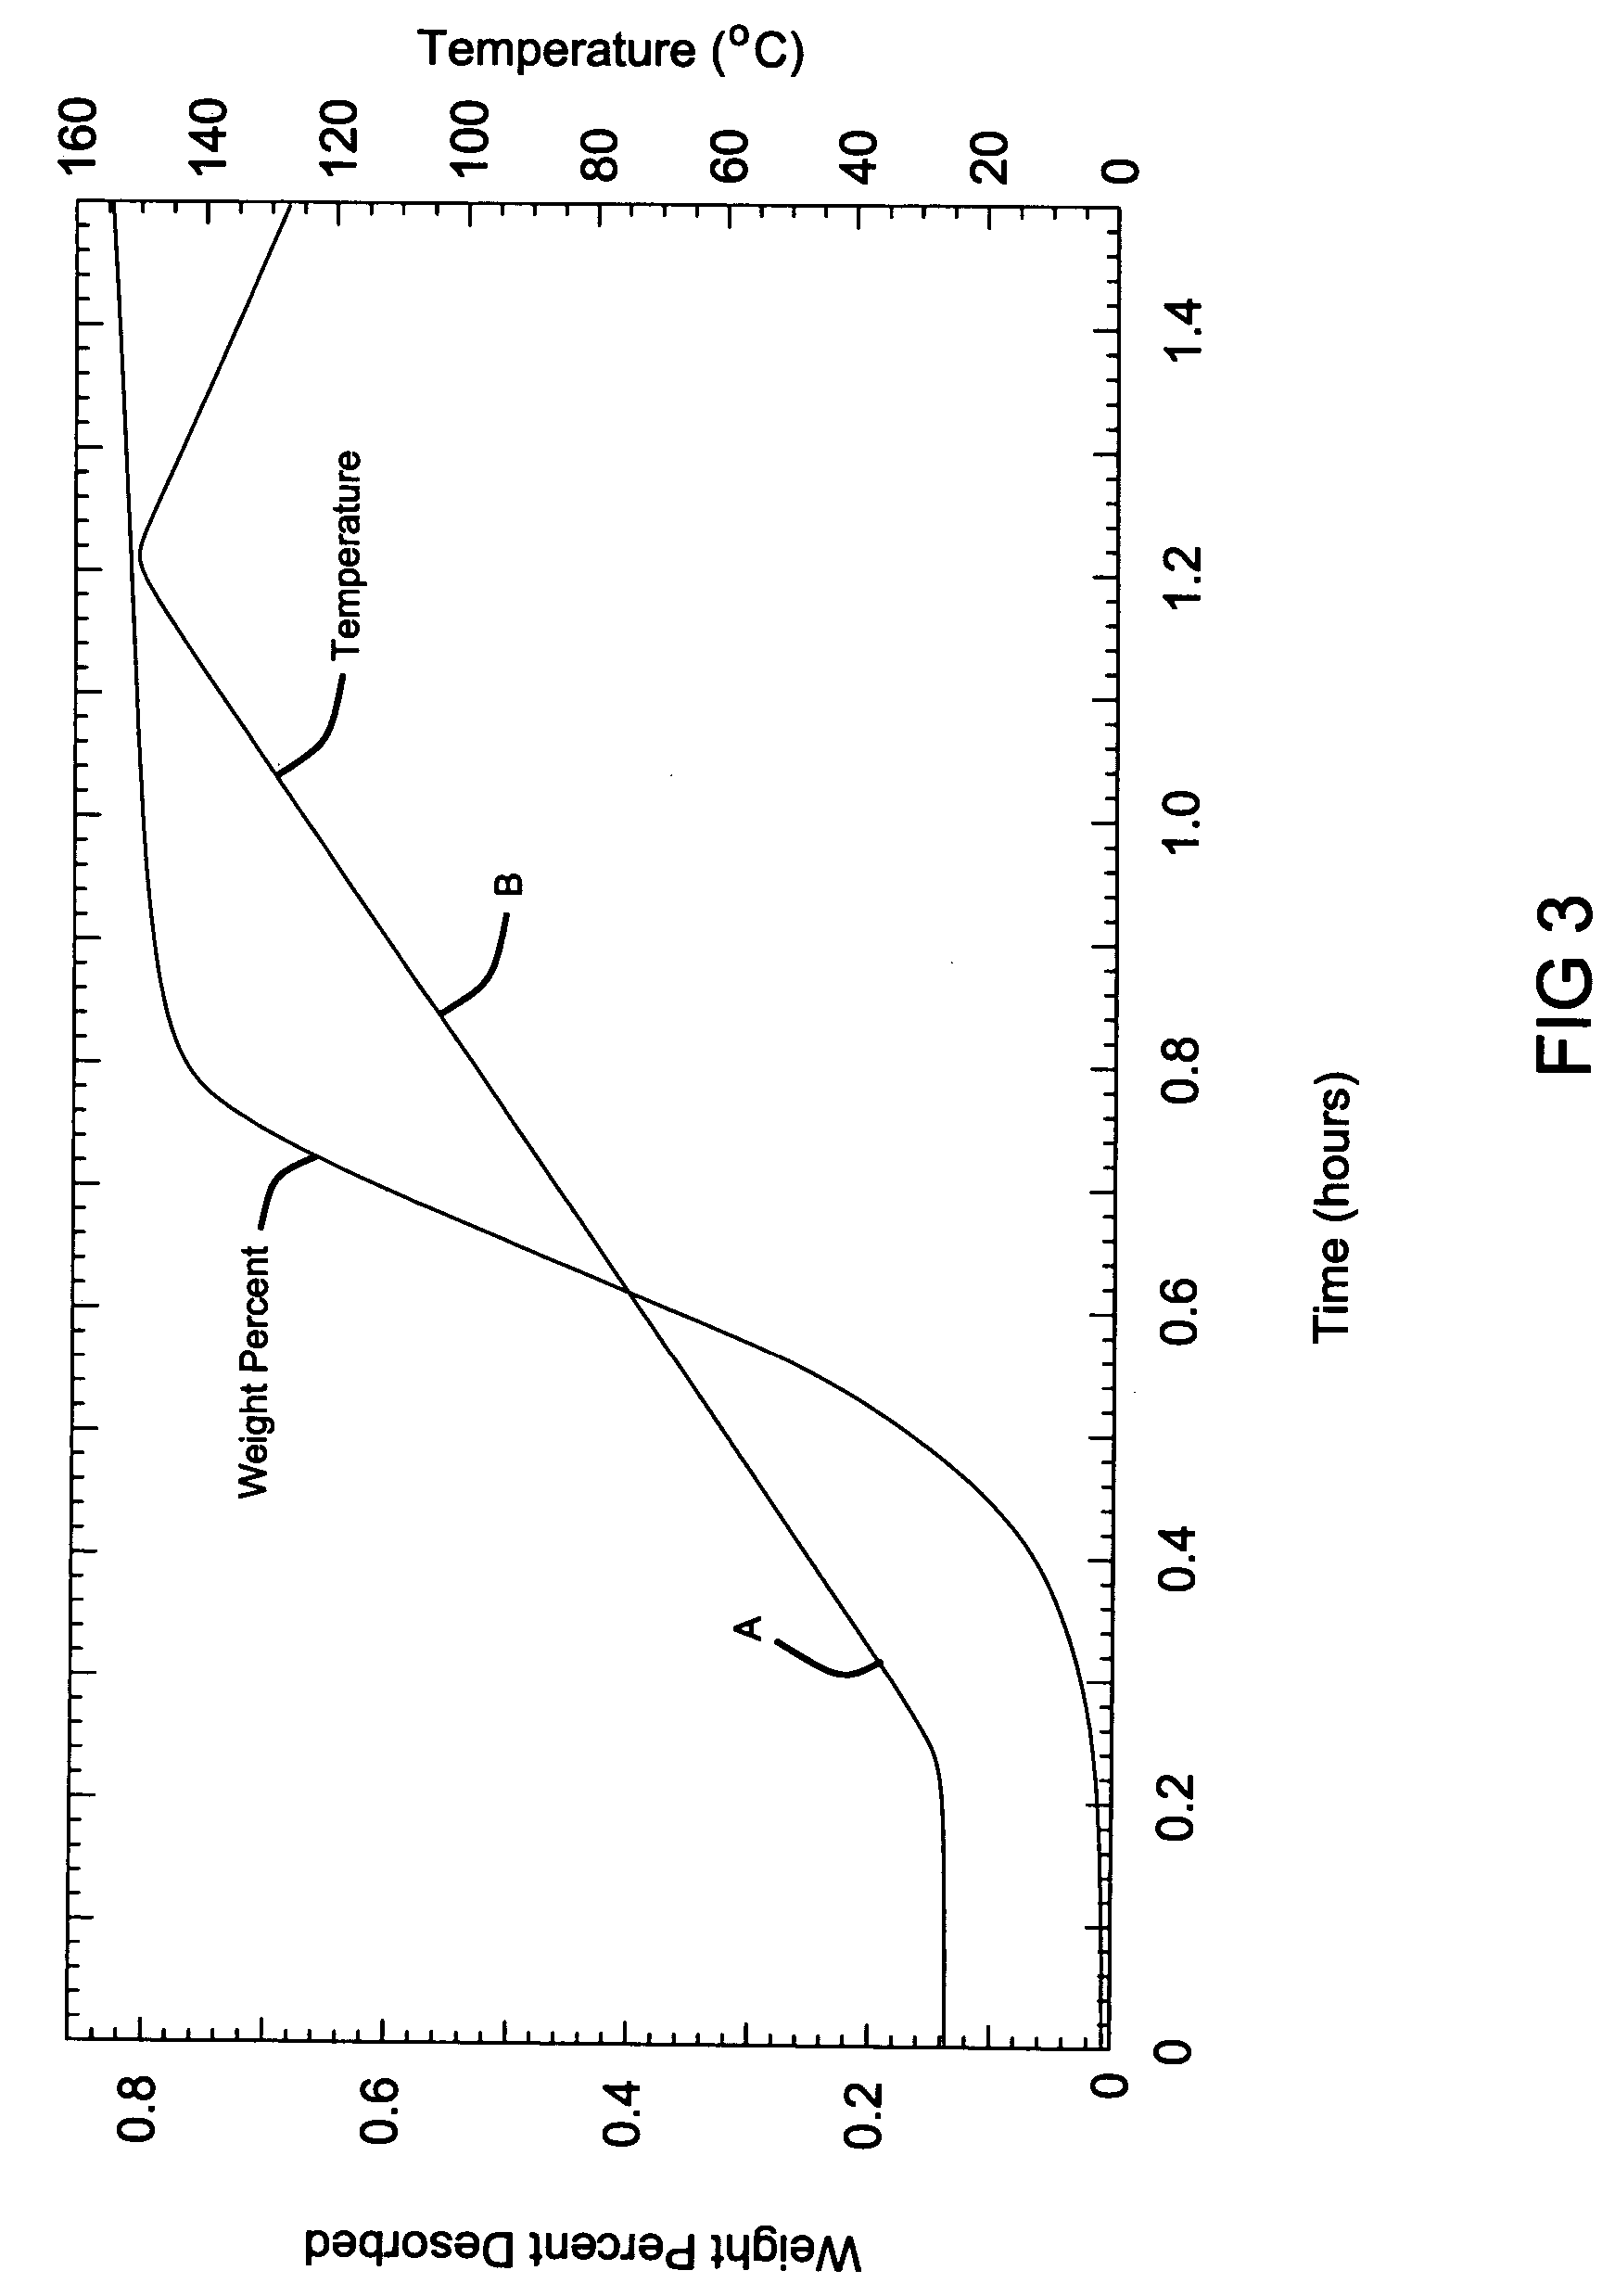 Hydrogen storage system materials and methods including hydrides and hydroxides